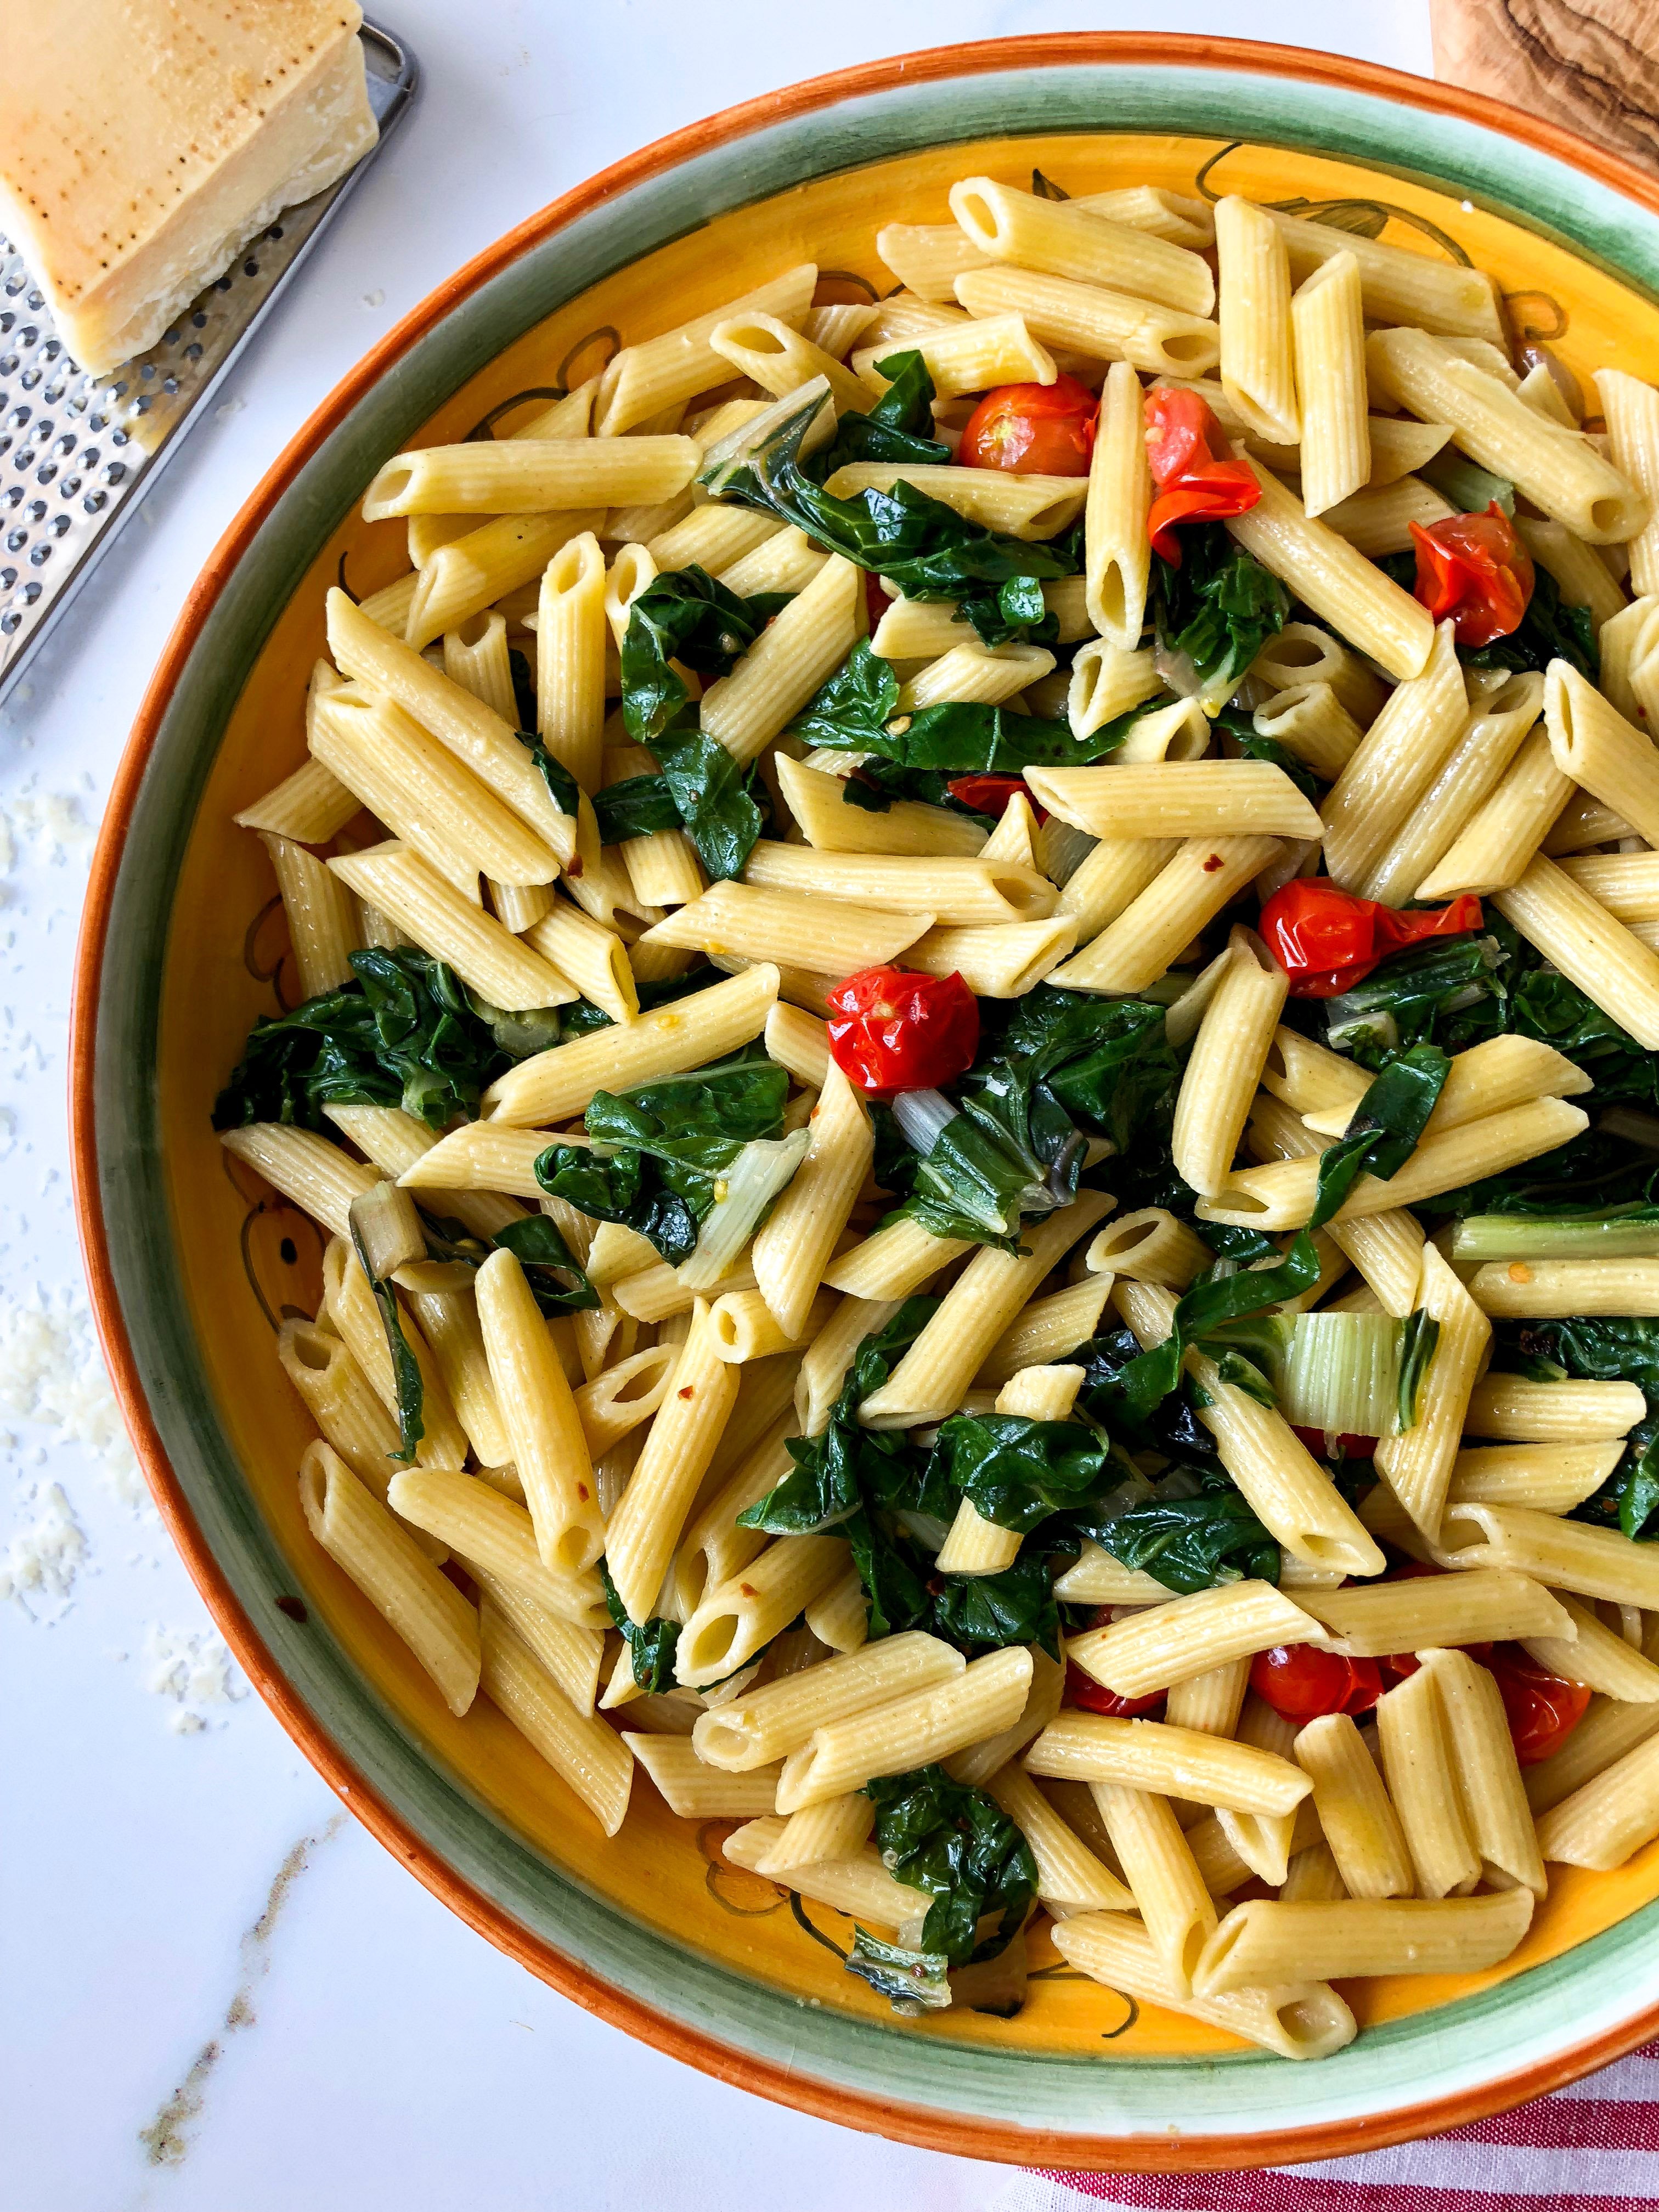 Pasta with Swiss chard and tomatoes